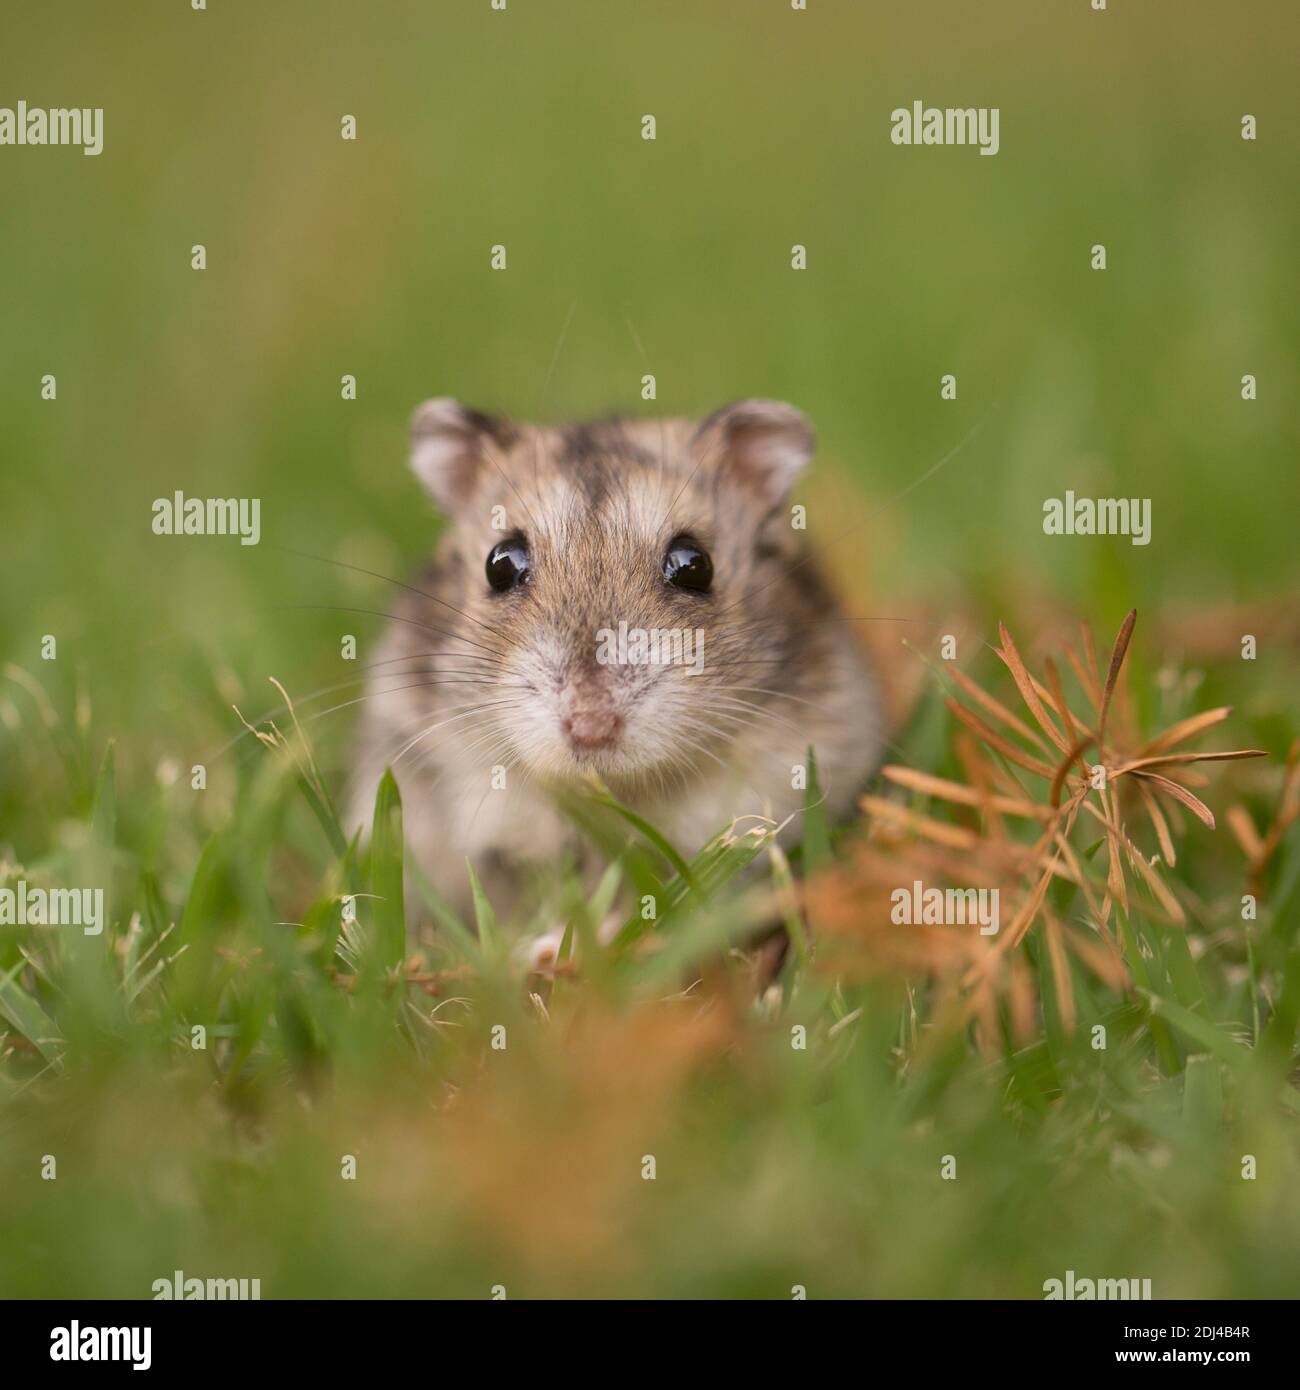 close up and selective focus of a Djungarian hamster (Phodopus sungorus), also known as the Siberian hamster, on lawn. Photographed in Israel in July Stock Photo